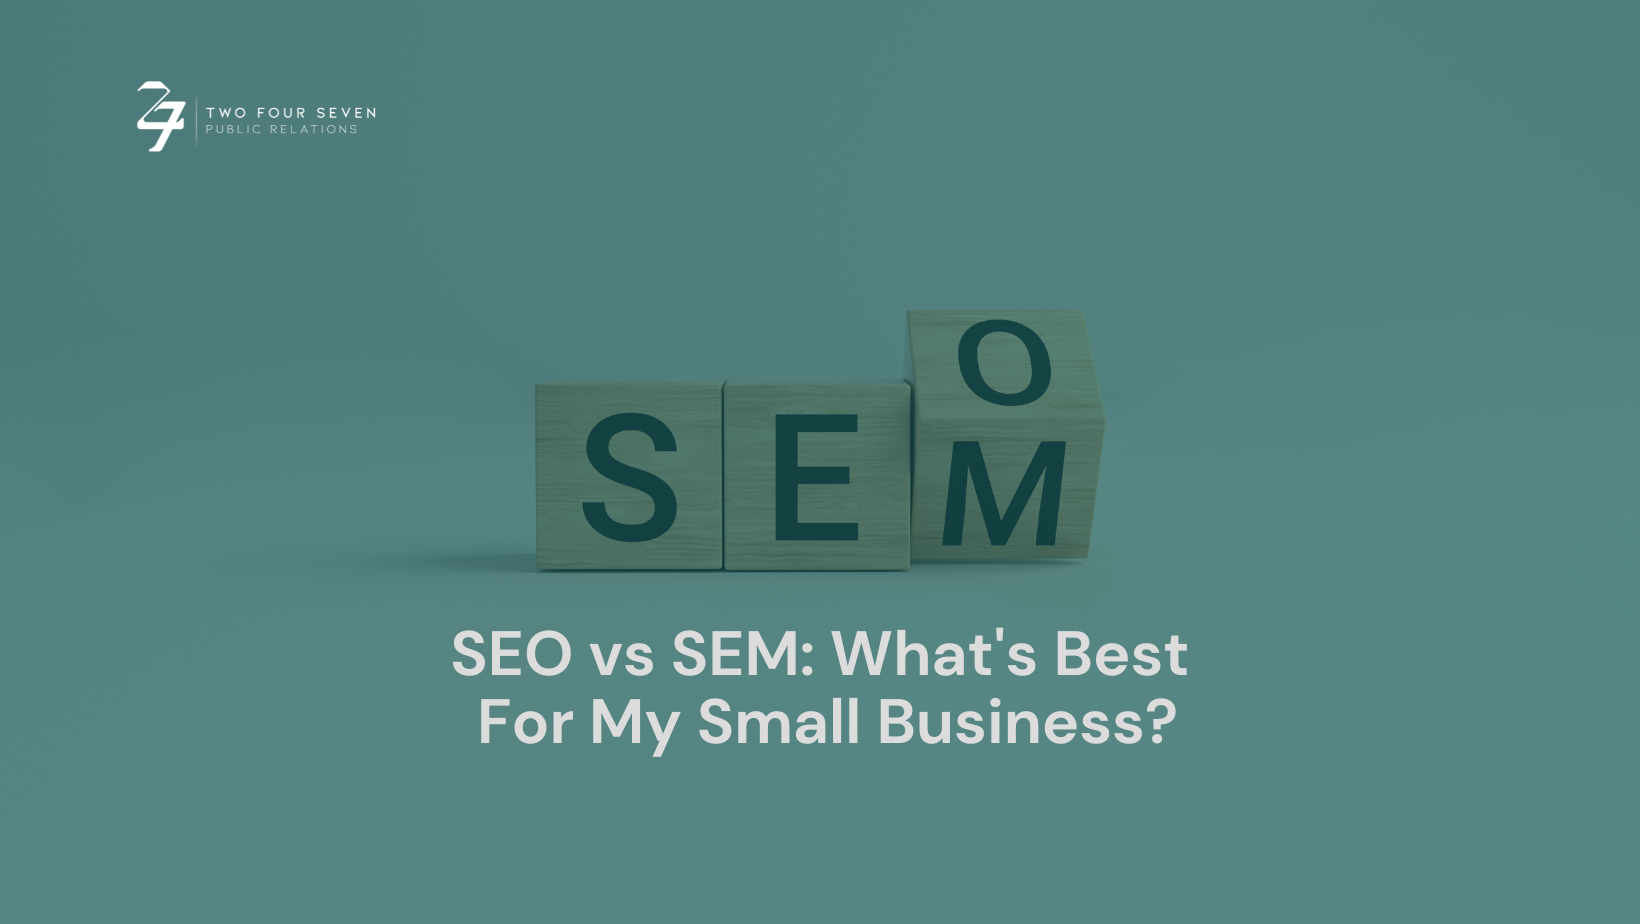 SEO or SEM: What’s Best for my Small Business?